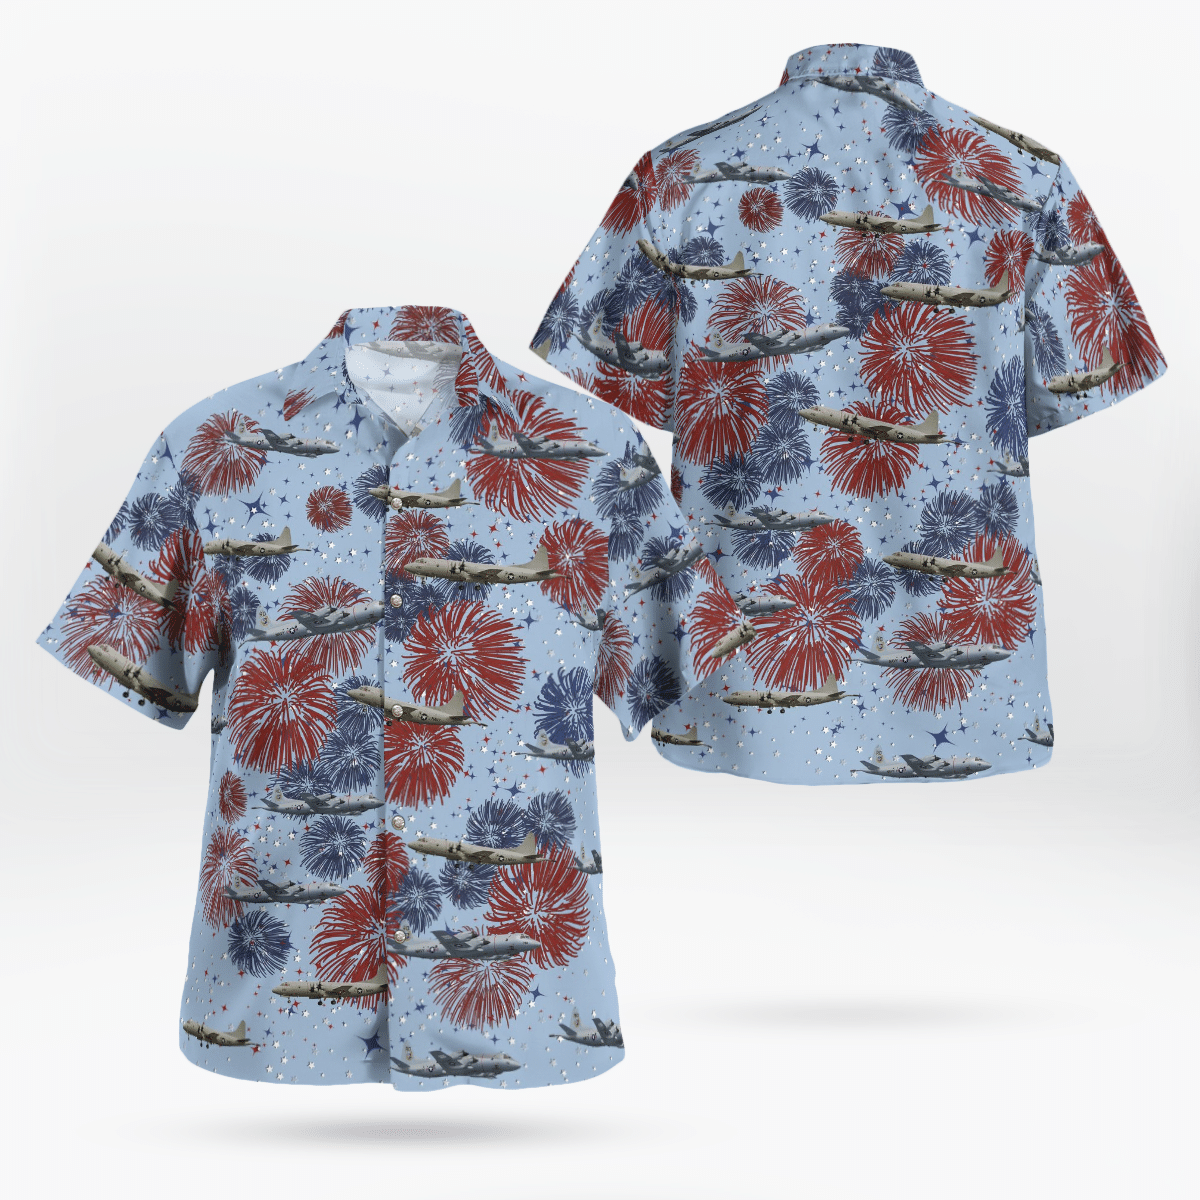 The Colors Of These Hawaiian Shirts Are Sure To Attract A Lot Of Attention Word1